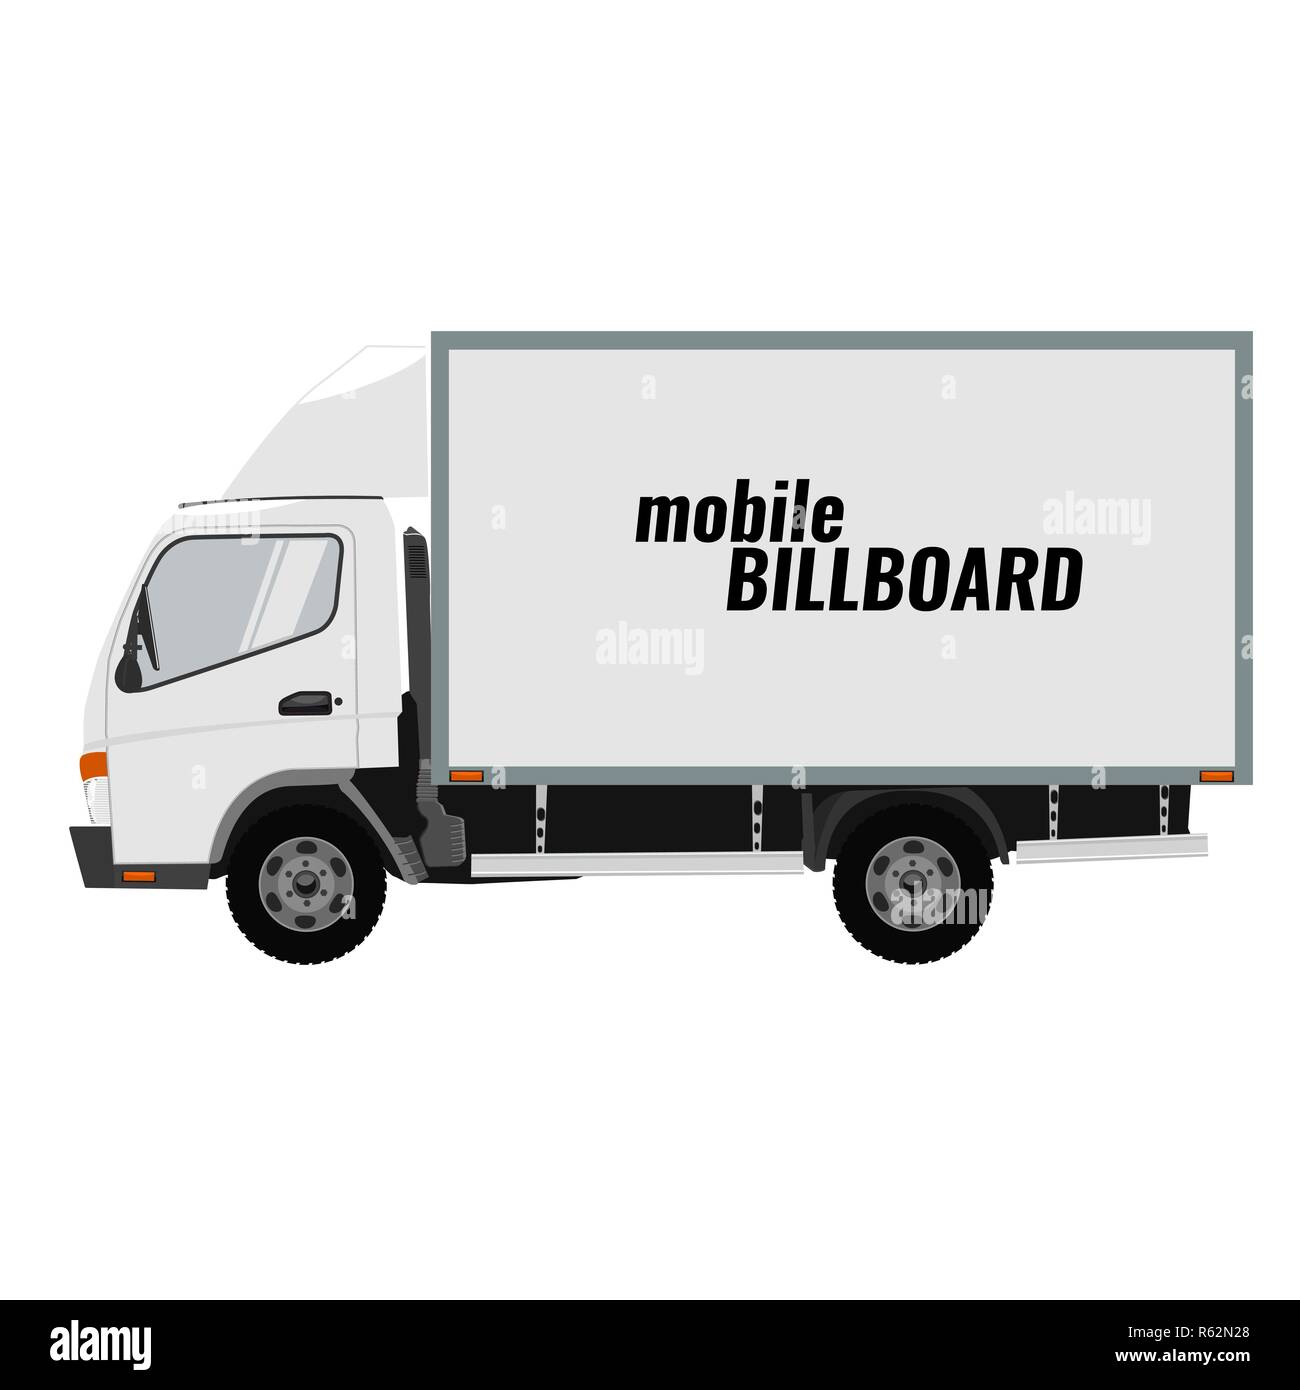 Blank mobile billboard template isolated on white background. Truck with solid and flat color design. Stock Vector